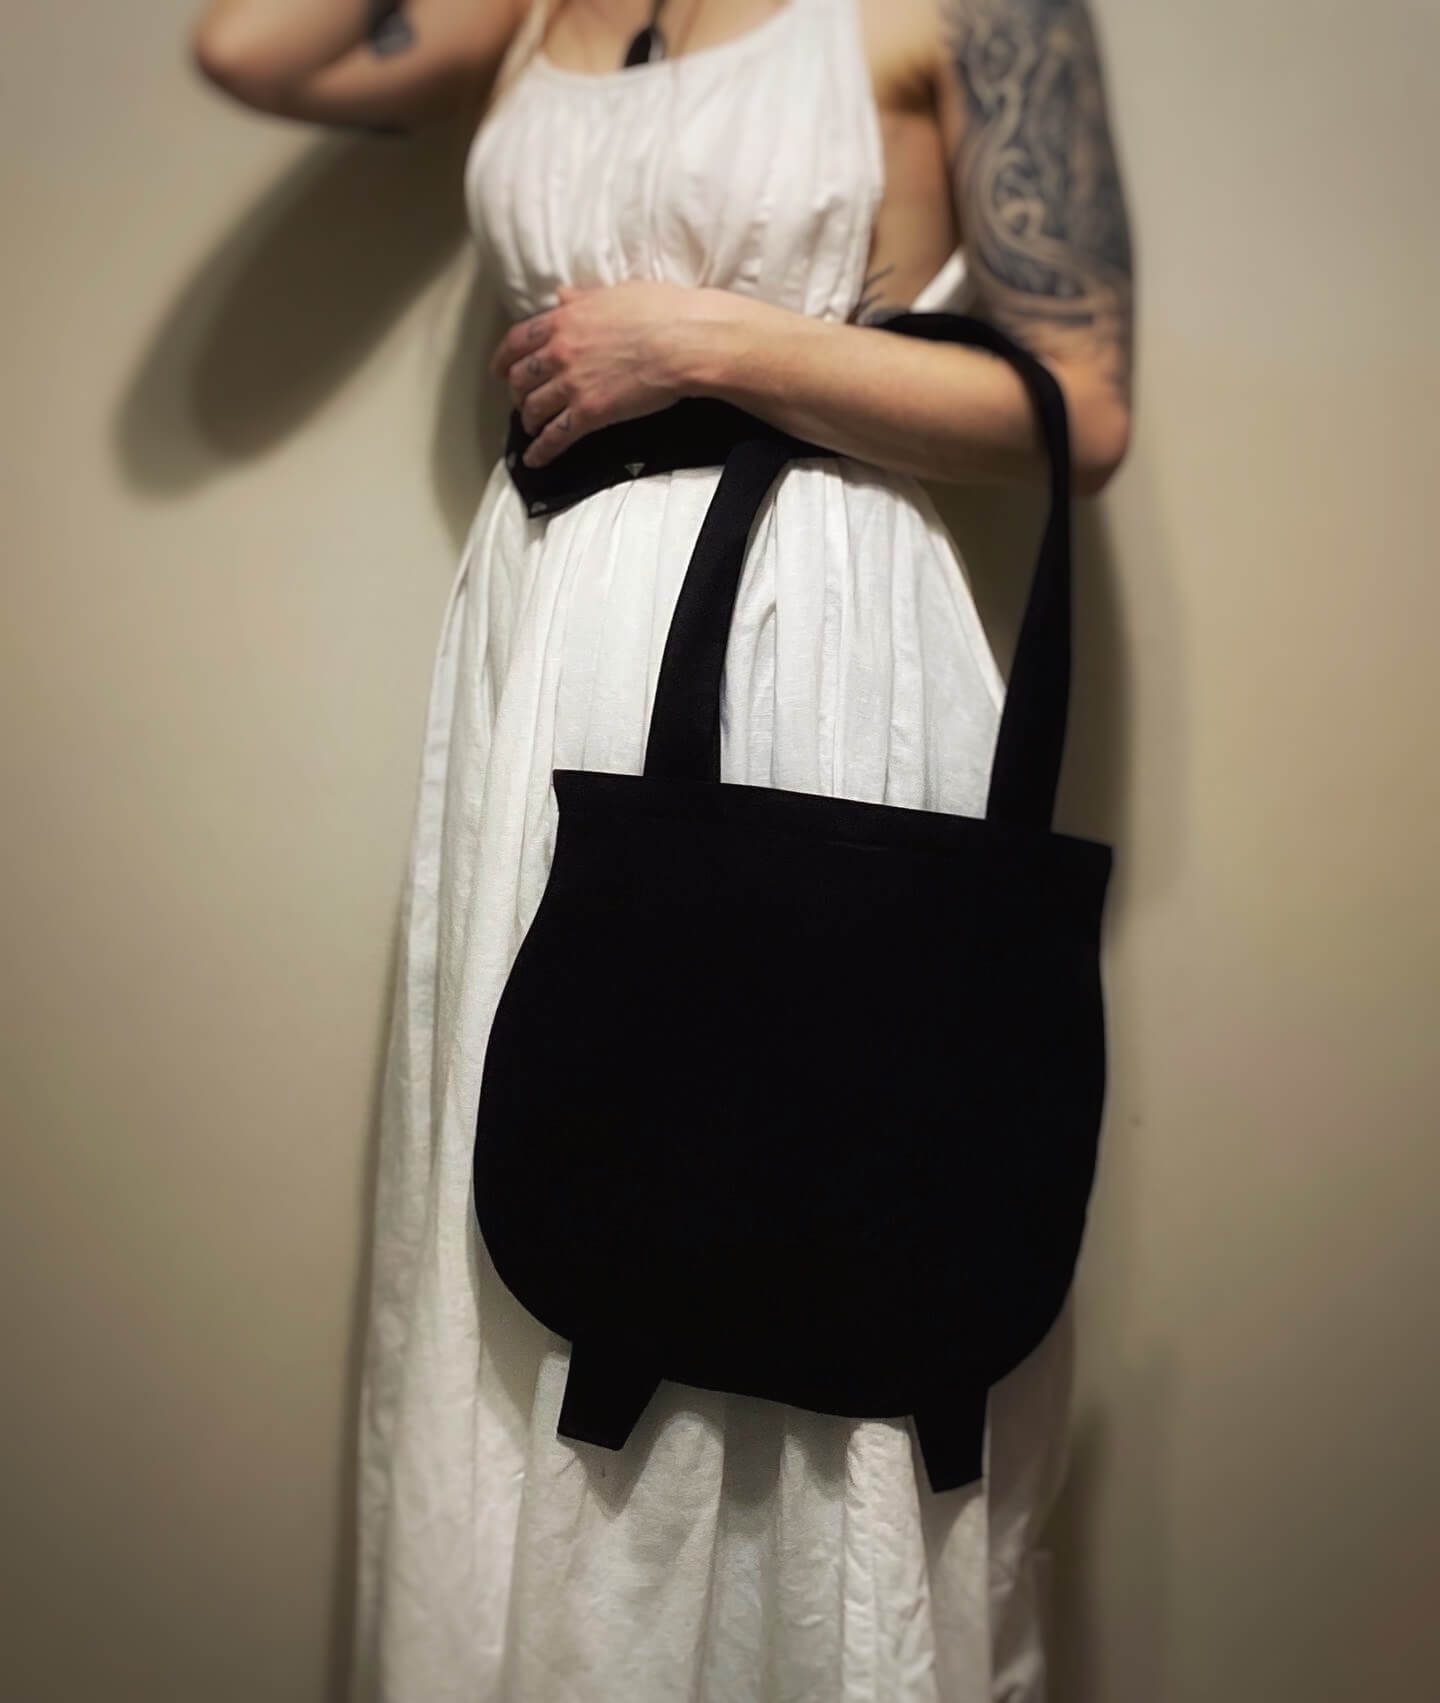 This phot showcases a black tote bag in the shape of a witches cauldron. Its resting on a woman's left forearm. She is wearing a white dress, only her torso to is visible in the photo.